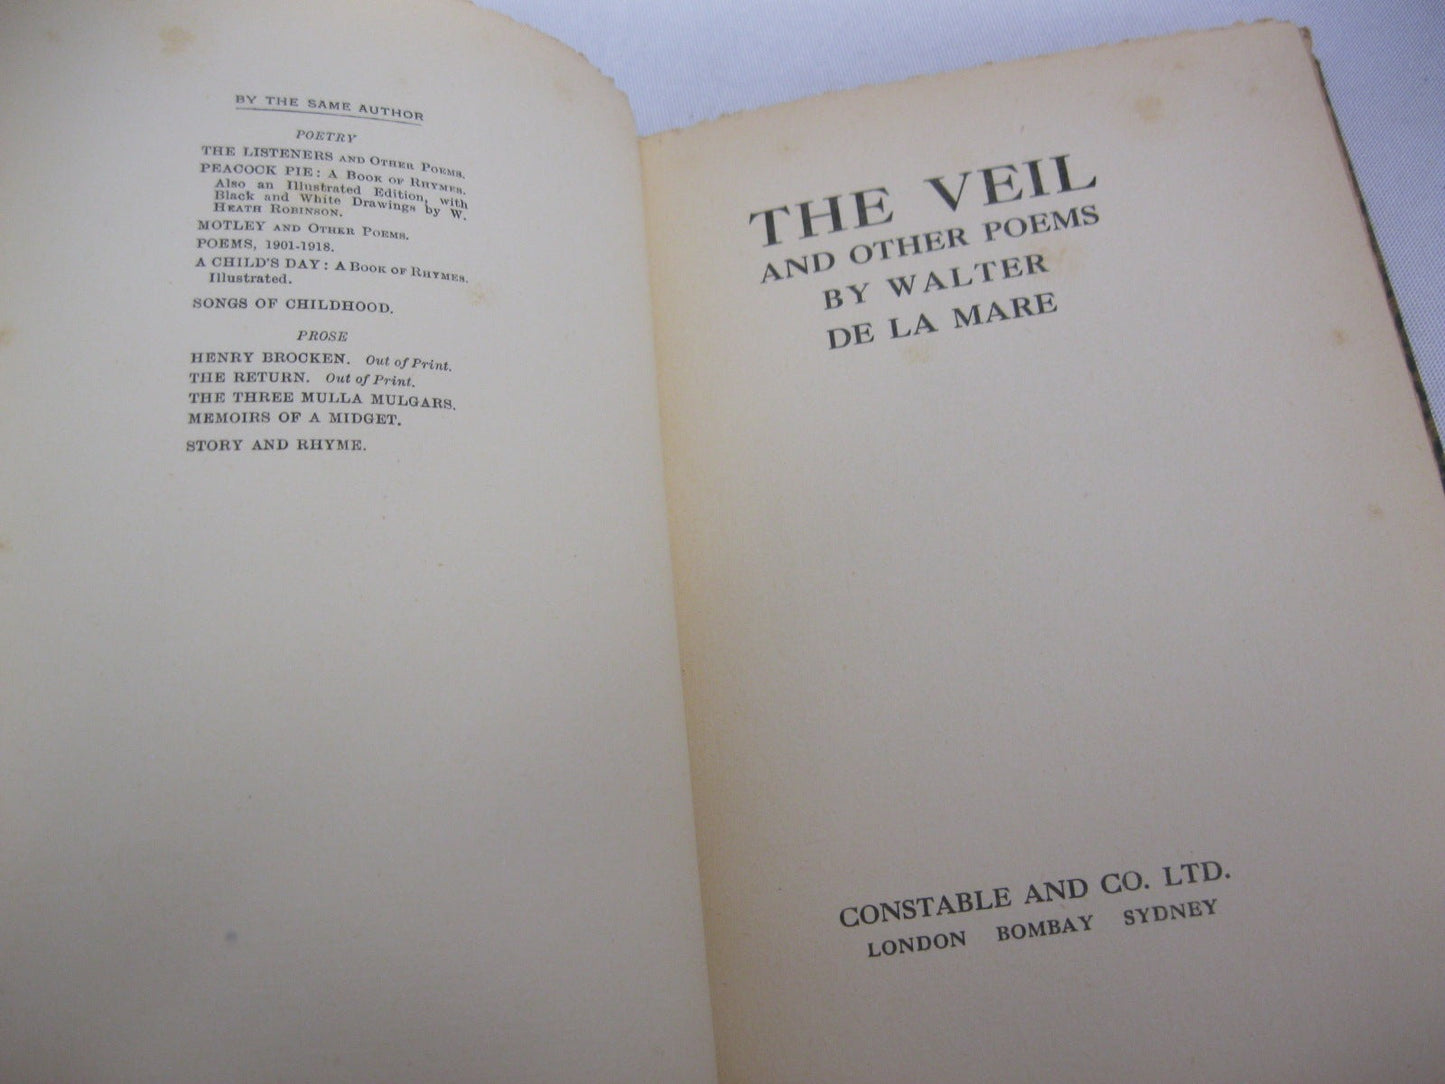 The Veil and other poems by Walter de la Mare